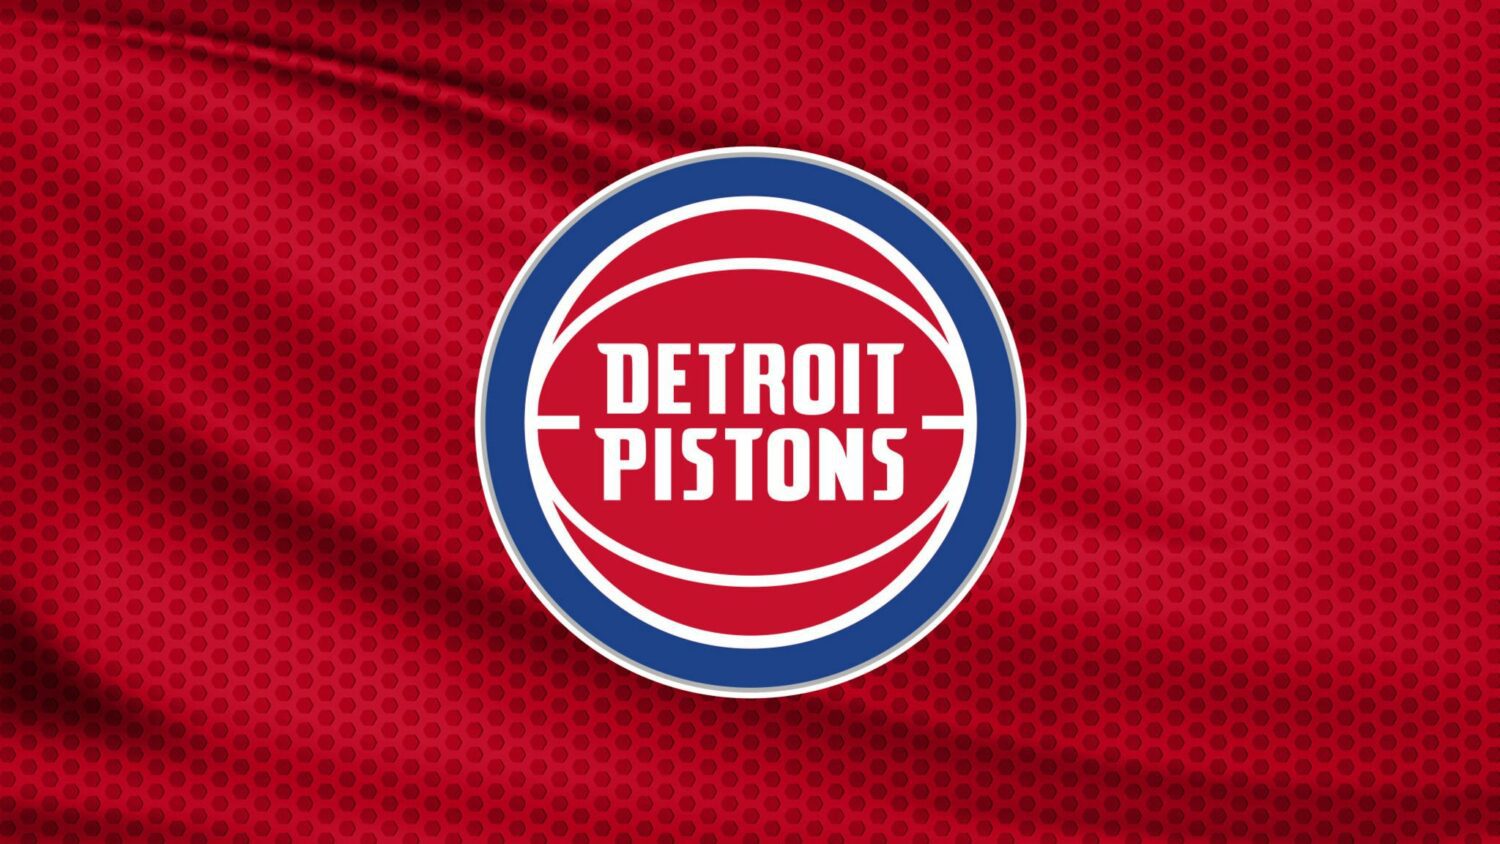 Detroit Pistons Selects Progyny for Value-Based Family Building Care